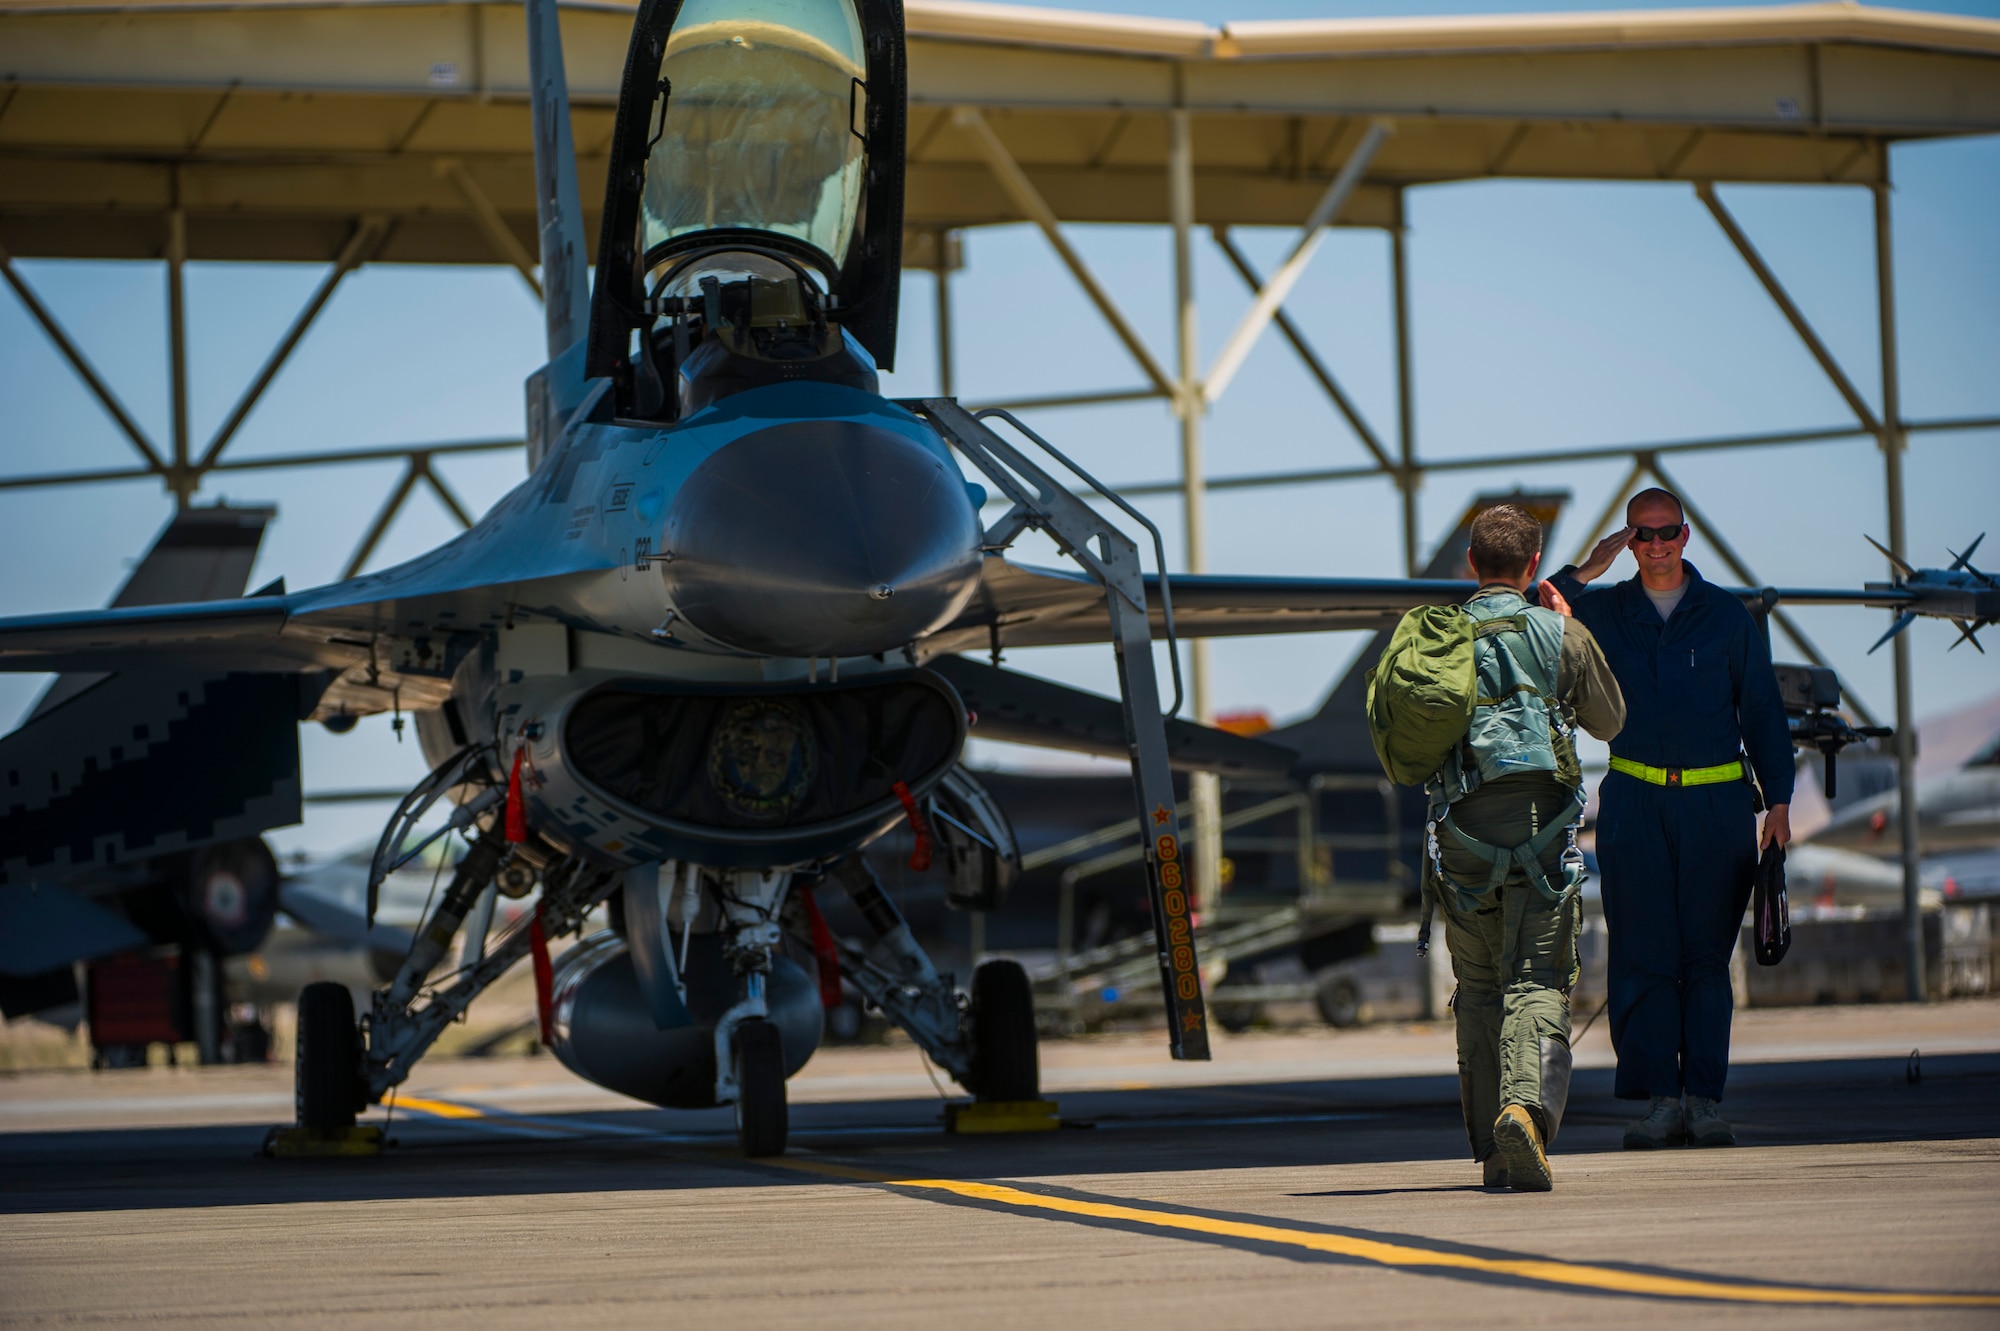 Lt. Col. Jan Stahl, 706th Fighter Squadron commander, renders a salute to Airman 1st Class Russell Lee, 57th Aircraft Maintenance Squadron crew chief July 16, 2019, at Nellis Air Force Base, Nev. Red Flag focuses on the application of core missions to include Command and Control, Intelligence Surveillance, Strike and Personnel Recovery and how to work with Coalition counterparts to ensure success. The 706th Fighter Squadron oversees Air Force Reserve Command members assigned to the U.S. Air Force Warfare Center, supporting missions in its 57th Wing, 53rd Wing and 505th Command and Control Wing. Pilots assigned to the 706 FS fly an array of aircraft to include the F-15C, F-15E, F-16, F-22 and F-35 aircraft. To prepare combat air forces, joint and allied crews with realistic training, pilots in the 706 FS operate with the 64th Aggressor Squadron to facilitate operational threat replication, training, and feedback. The Red Flag exercise will continue through July 26, 2019.